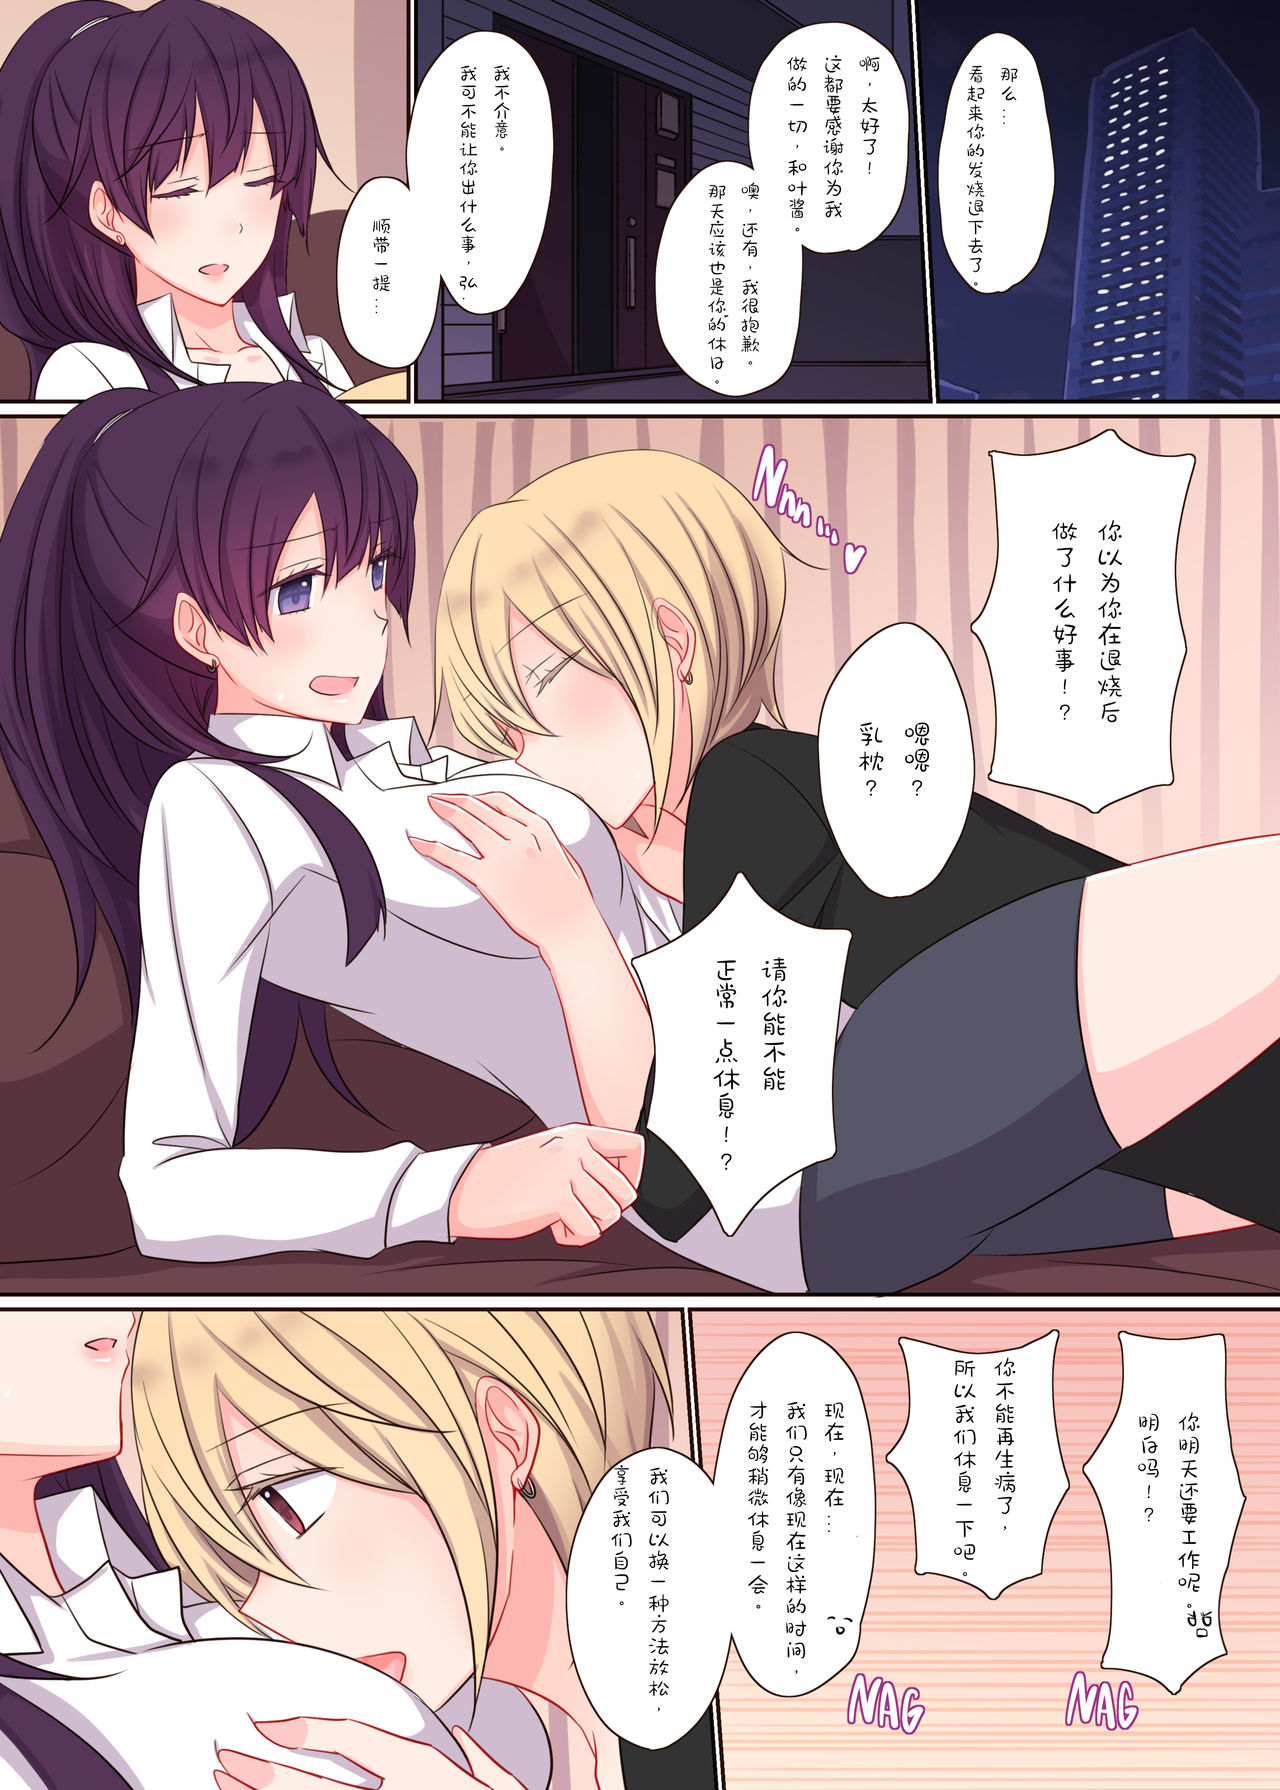 [434 Not Found (isya)] Office Sweet 365 -APPEND- [Chinese] [WTM直接汉化&v.v.t.m汉化组] [Digital] page 18 full